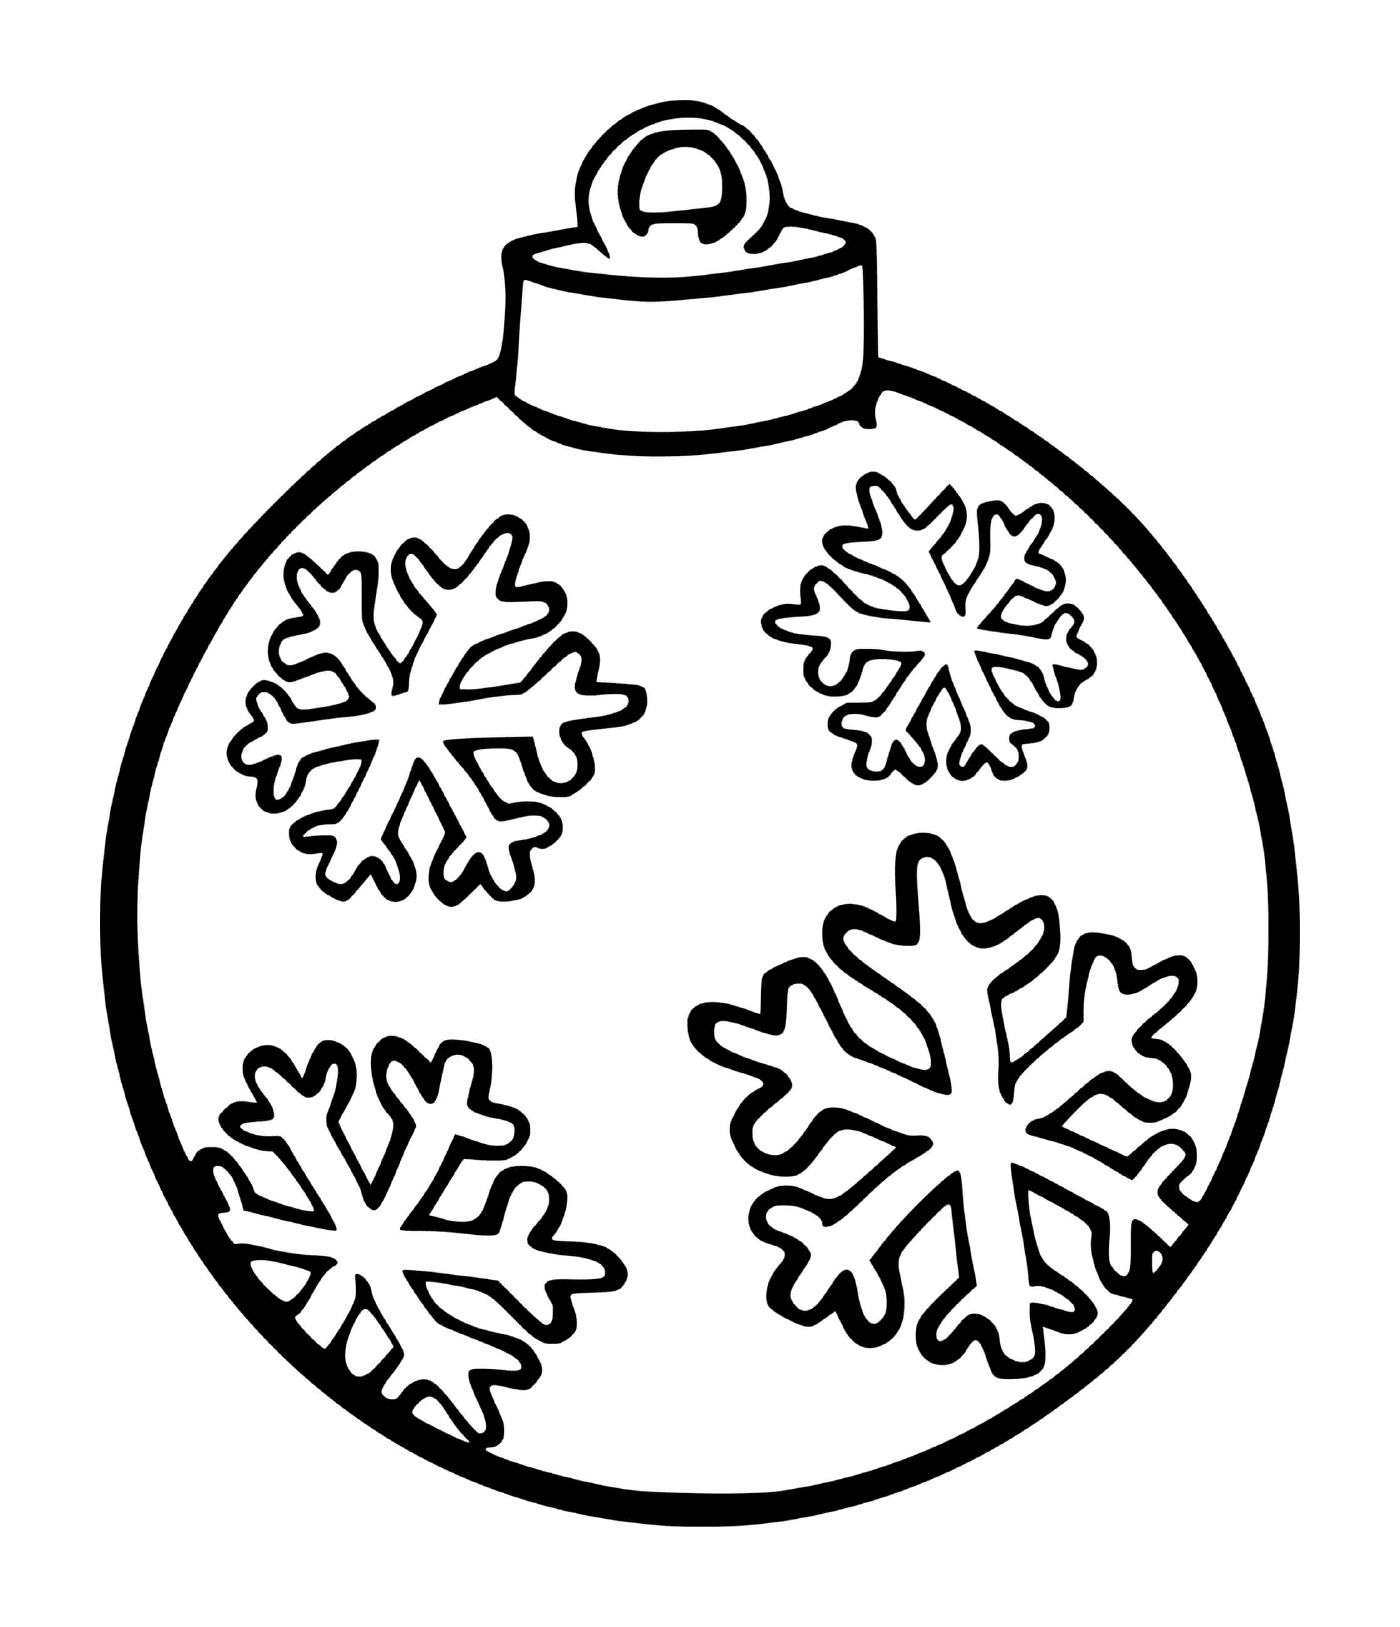  A snowflake in a Christmas tree ball 